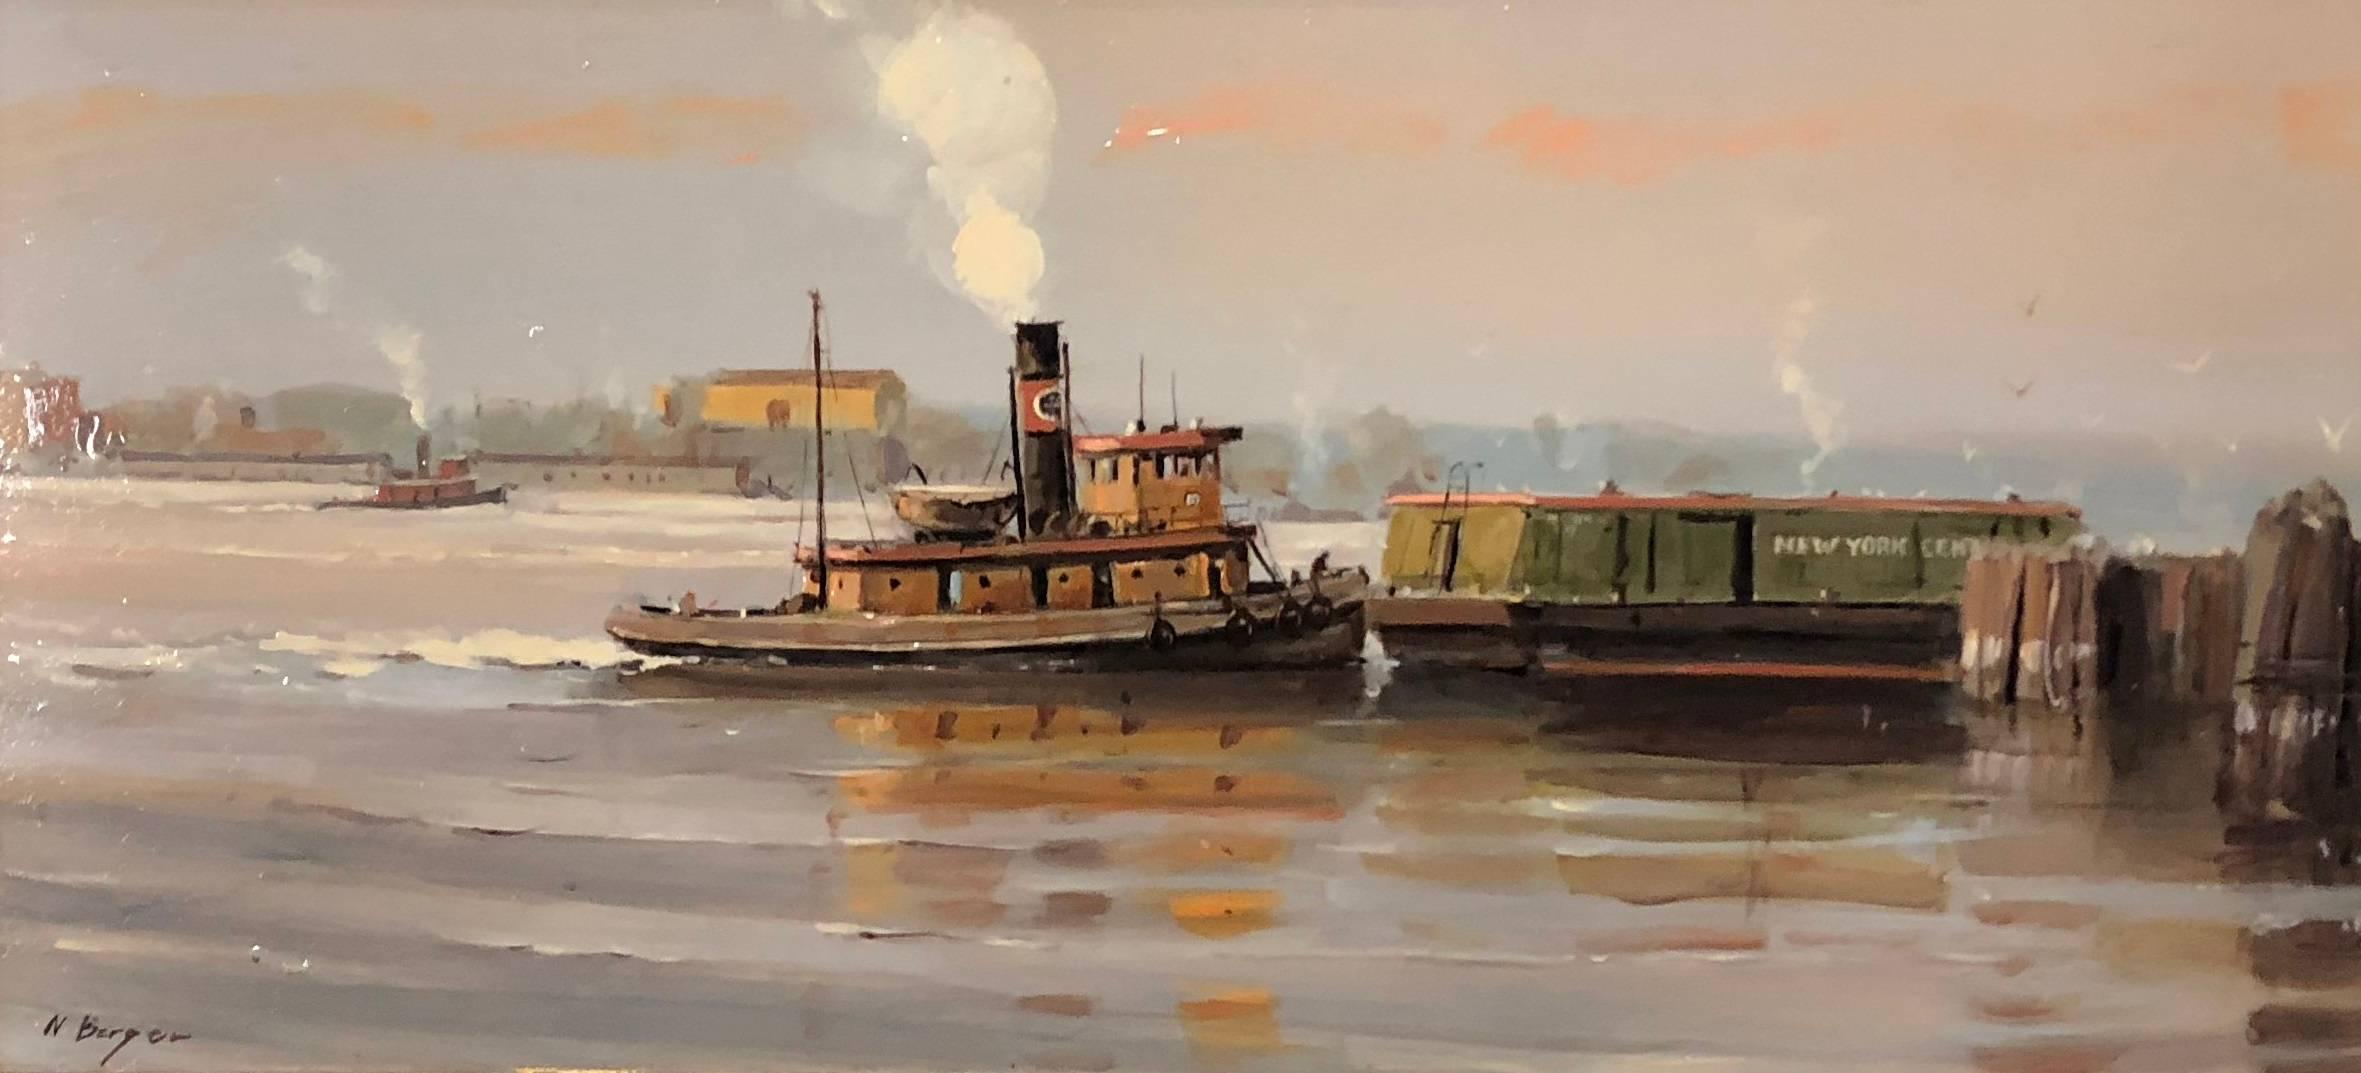 Nicholas Berger Landscape Painting - Easing In, New York Central Tug